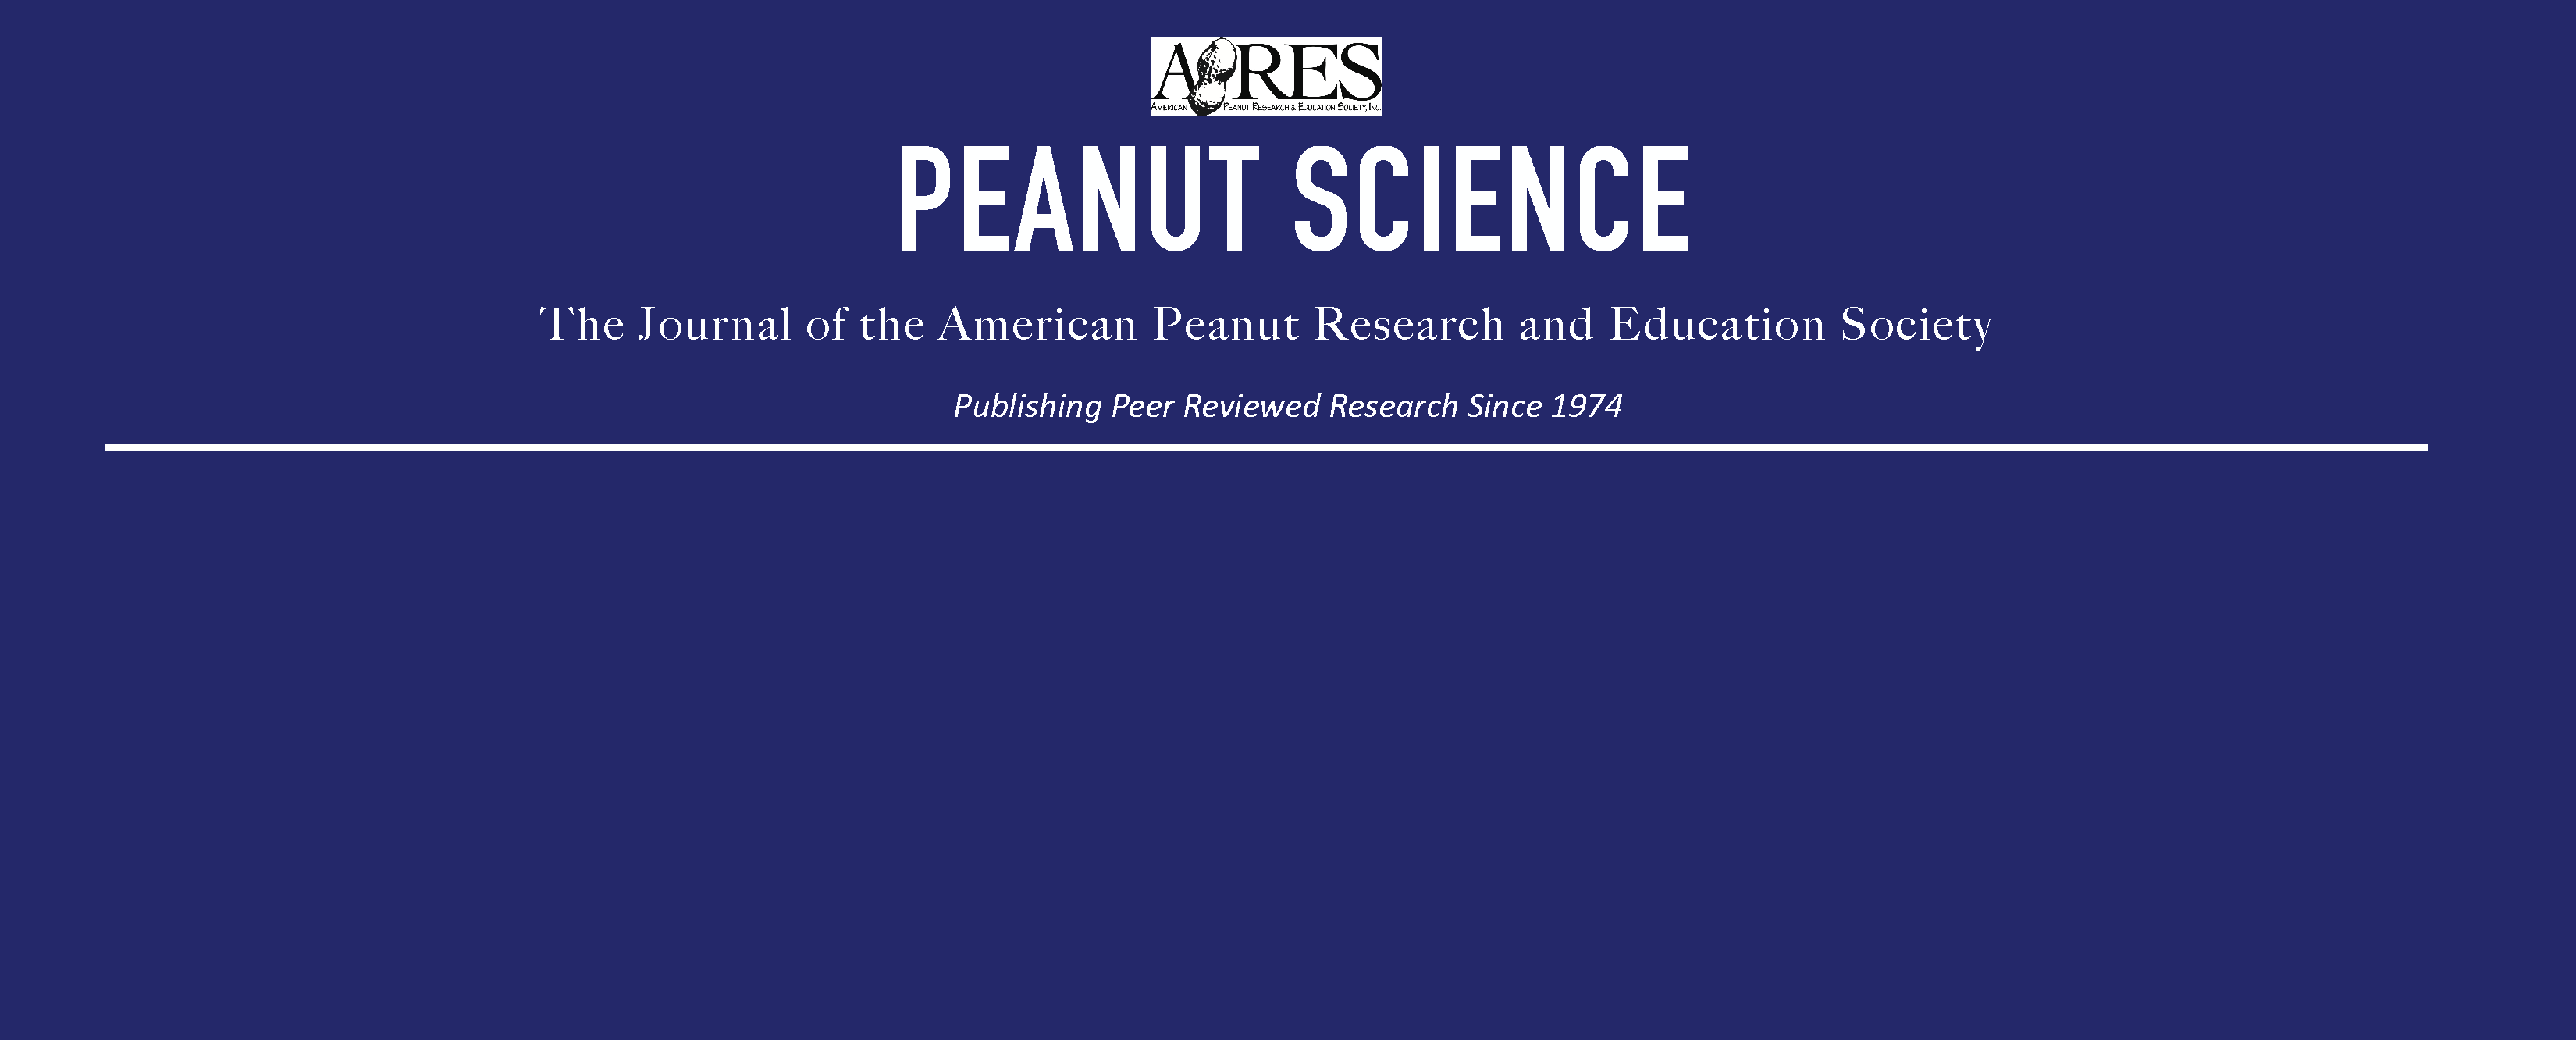 Calendar-based and AU-Pnuts Advisory Programs with Pyraclostrobin and Chlorothalonil for the Control of Early Leaf Spot and Stem Rot on Peanut¹